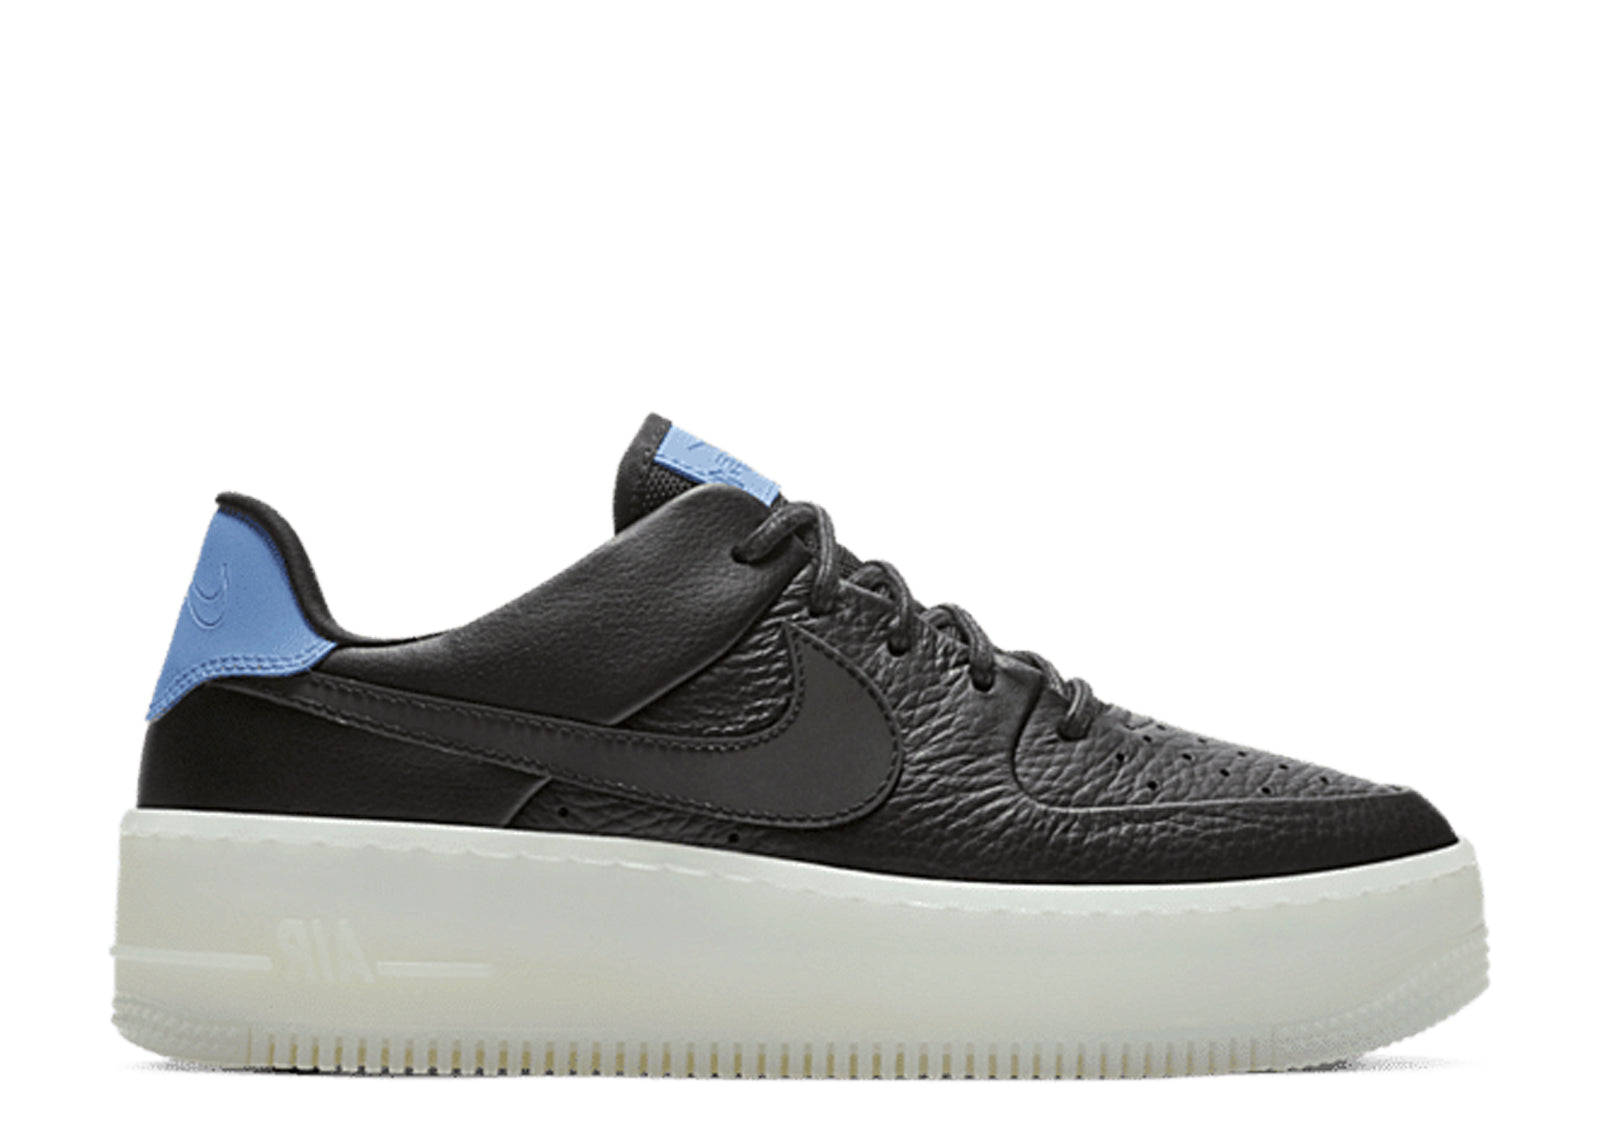 Second Chance - Multi Nike Air Force 1 Sage Low Black/Glace - 37,5 | NEW